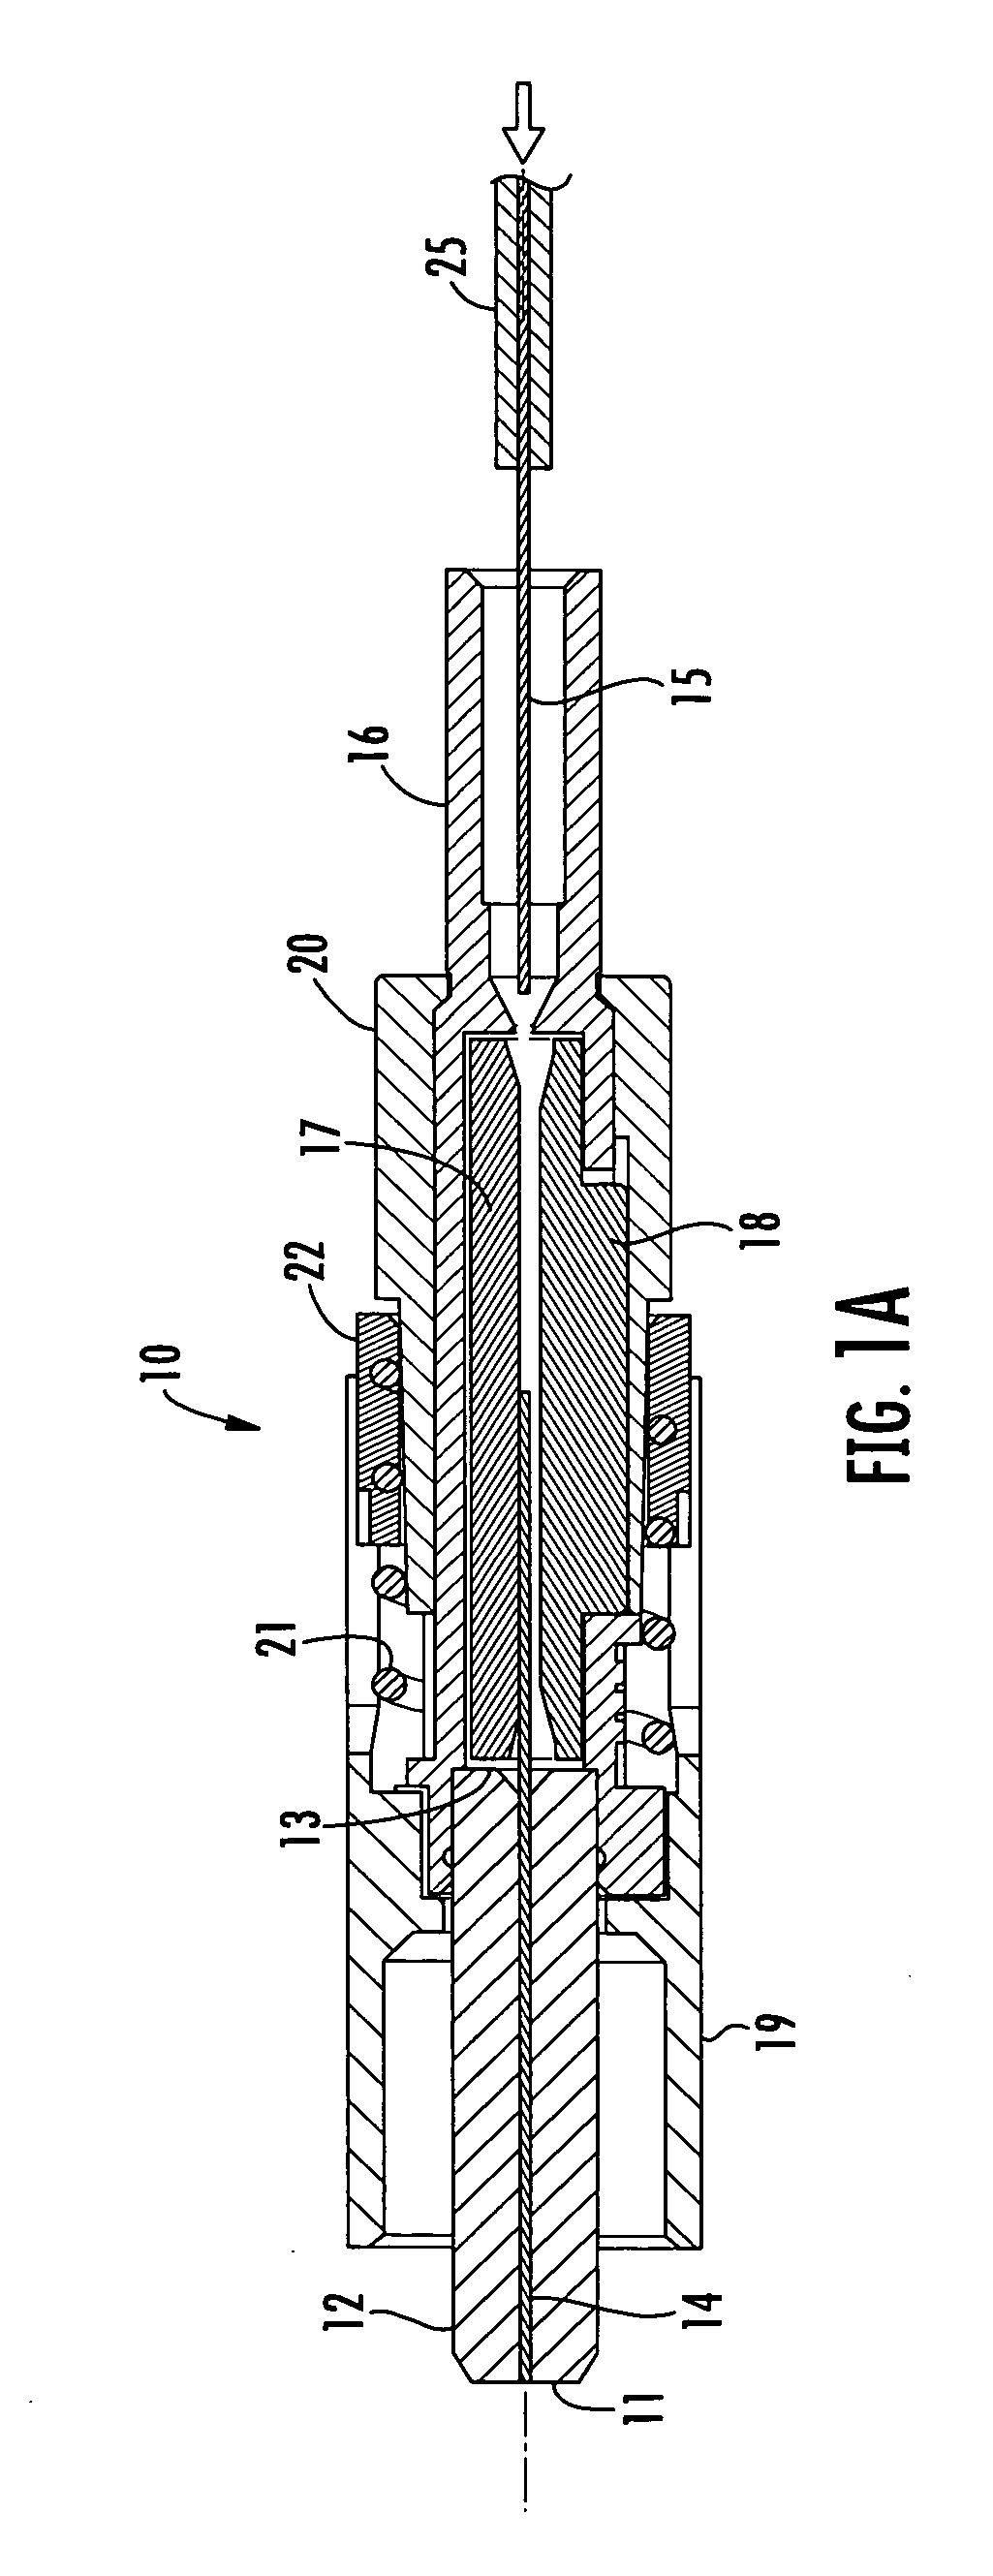 Apparatus and methods for verifying an acceptable splice termination